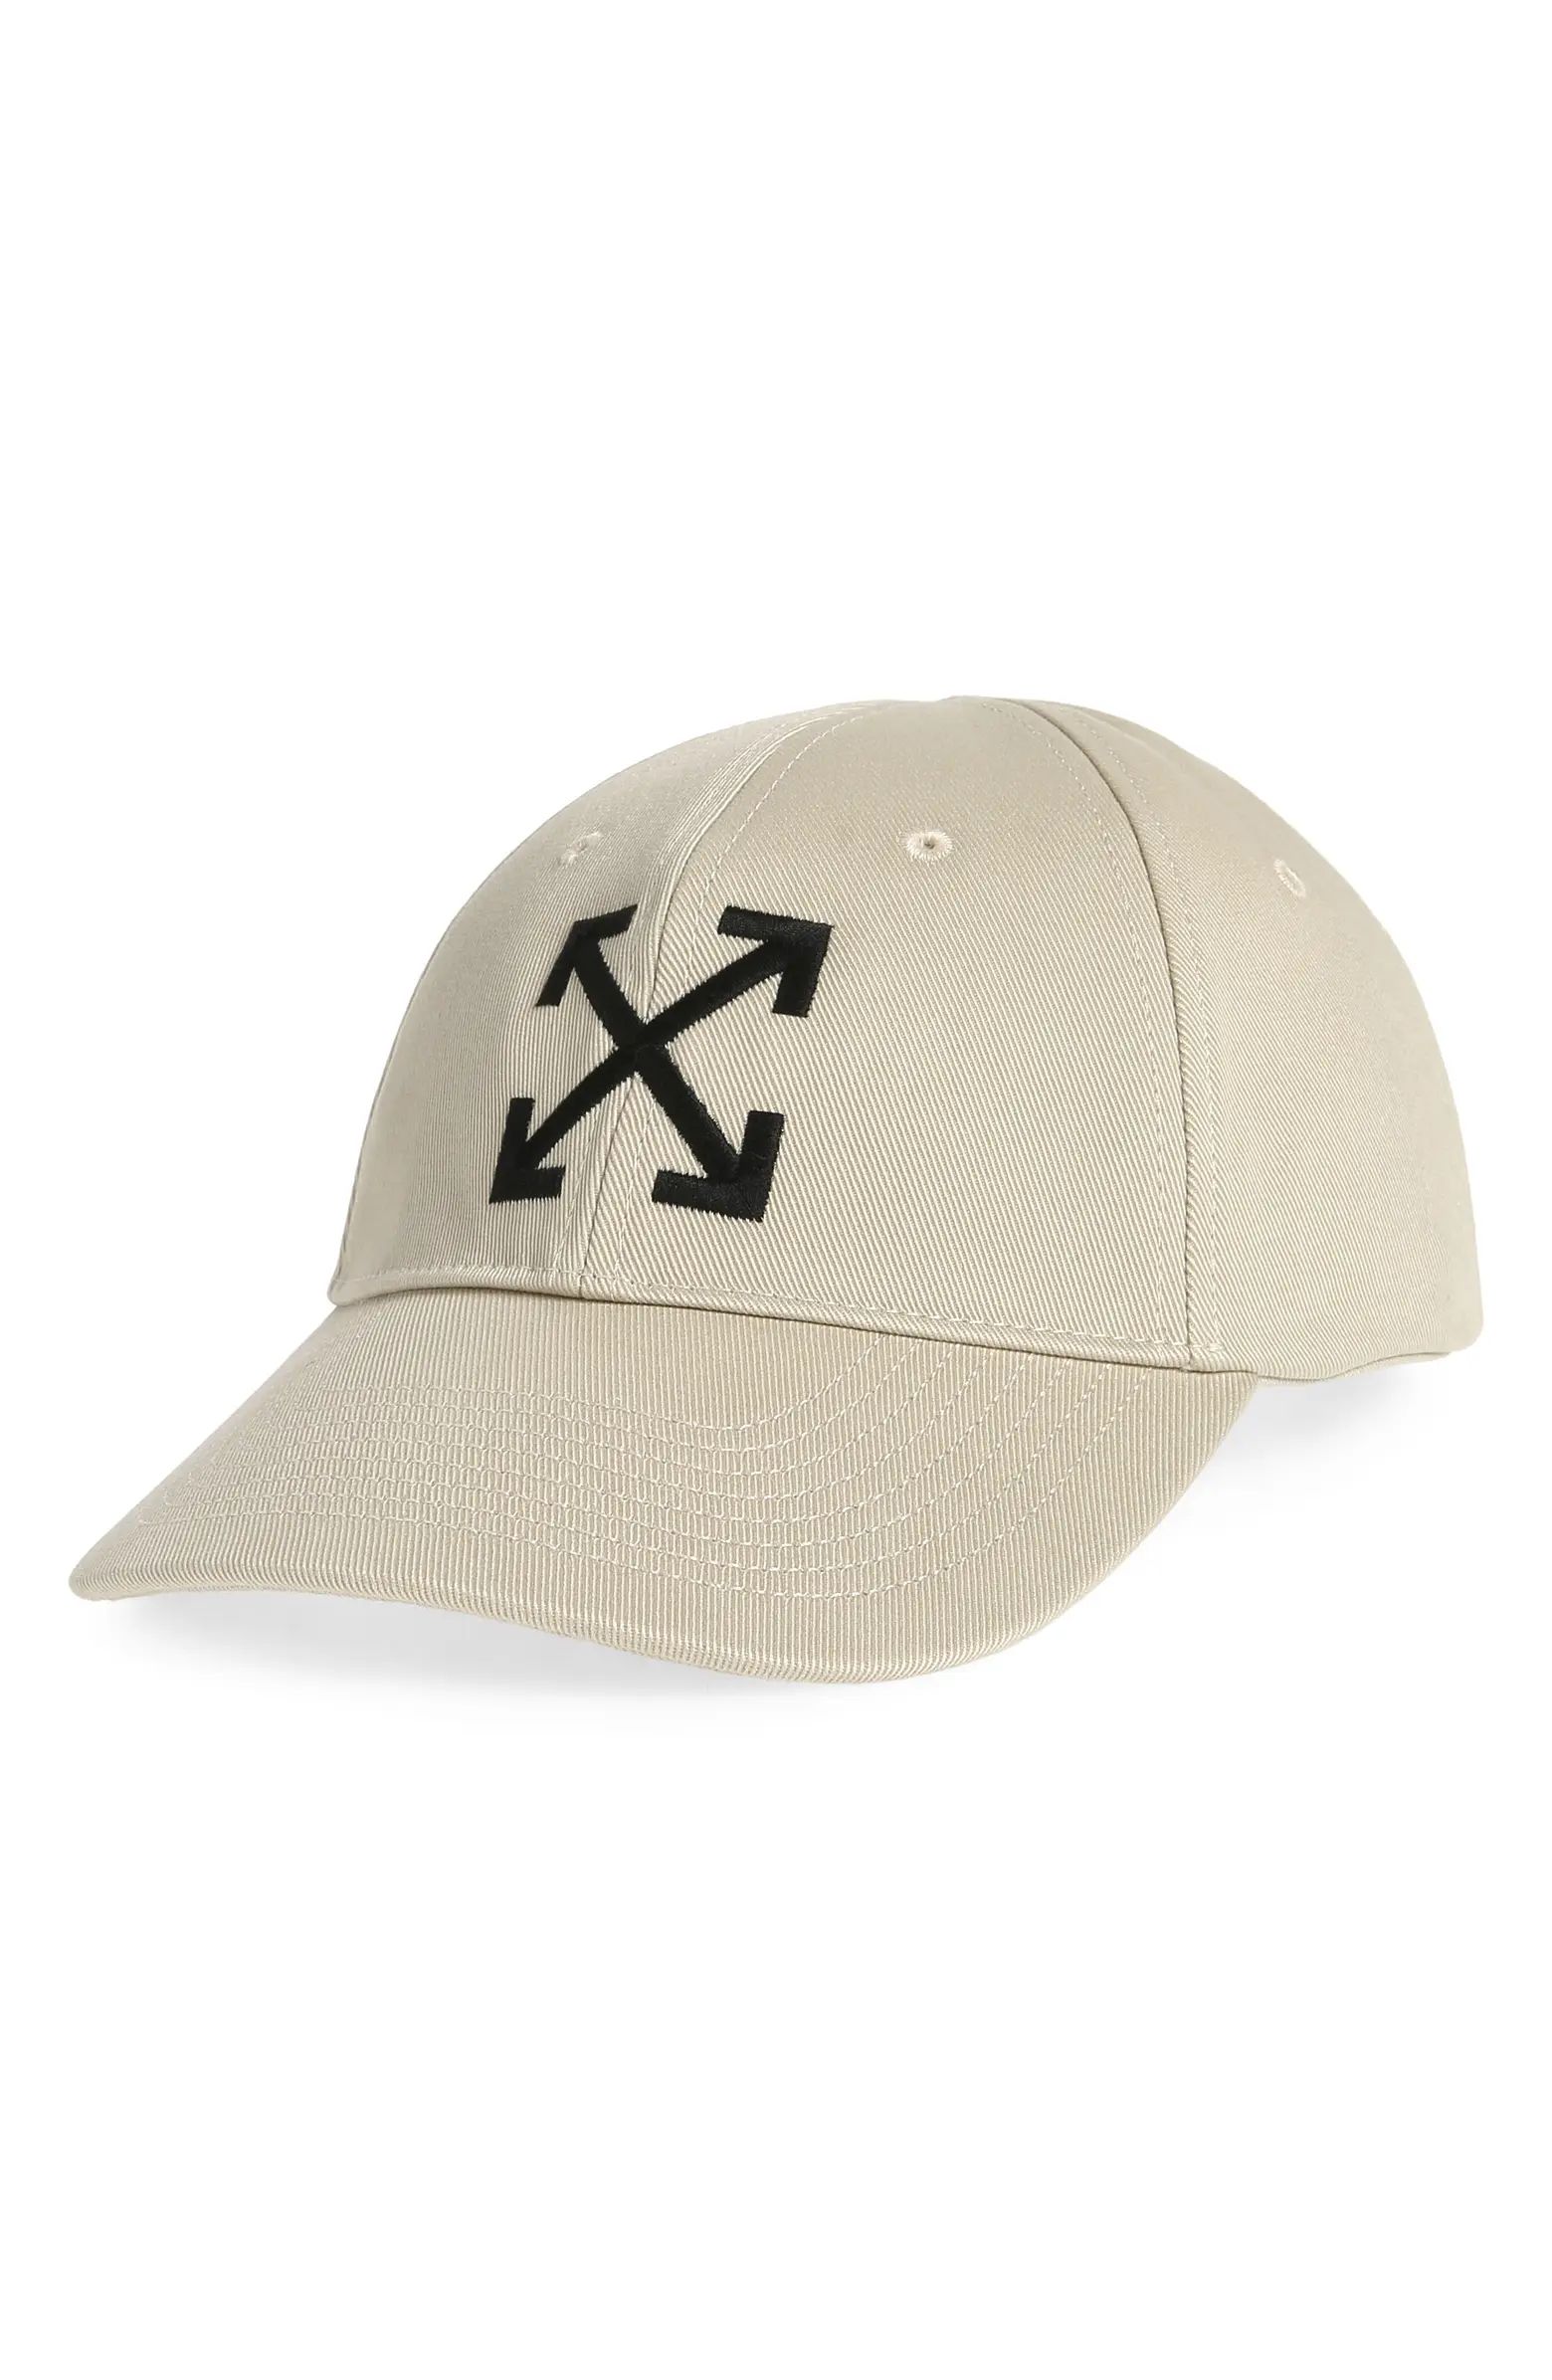 Off-White Arrow Embroidered Baseball Cap | Nordstrom | Nordstrom